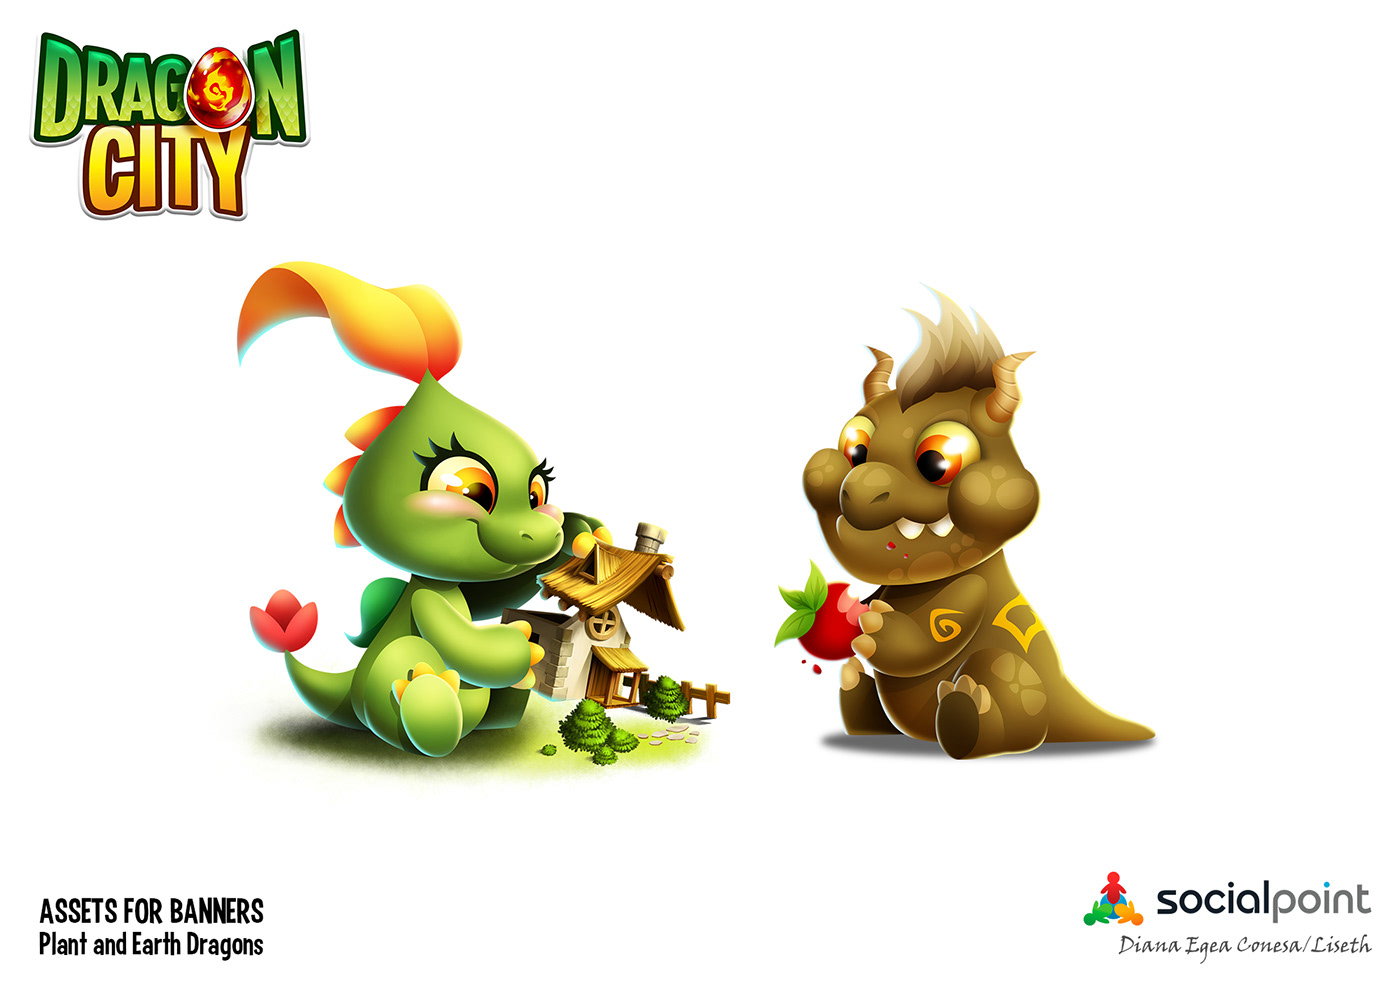 Dragon City Social Point videogame characters dragons flame star